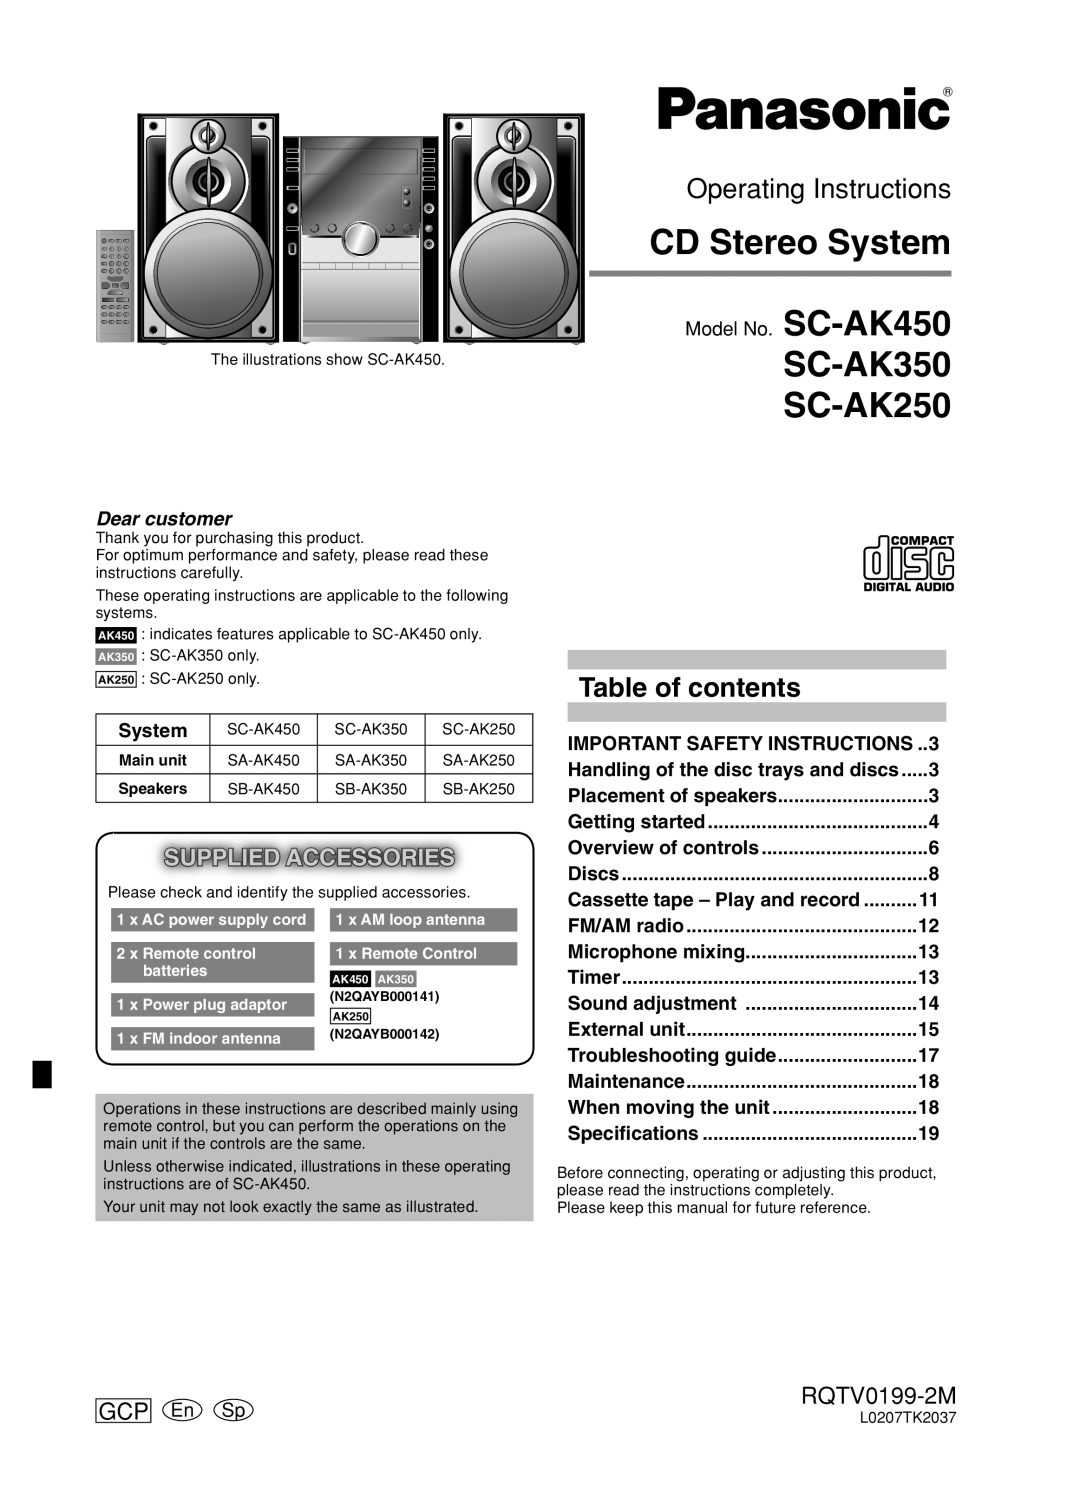 Panasonic SC-AK350 operating instructions E Eb Gn, RQTV0196-1B, System, Handling of the disc trays and discs, SC-AK250 